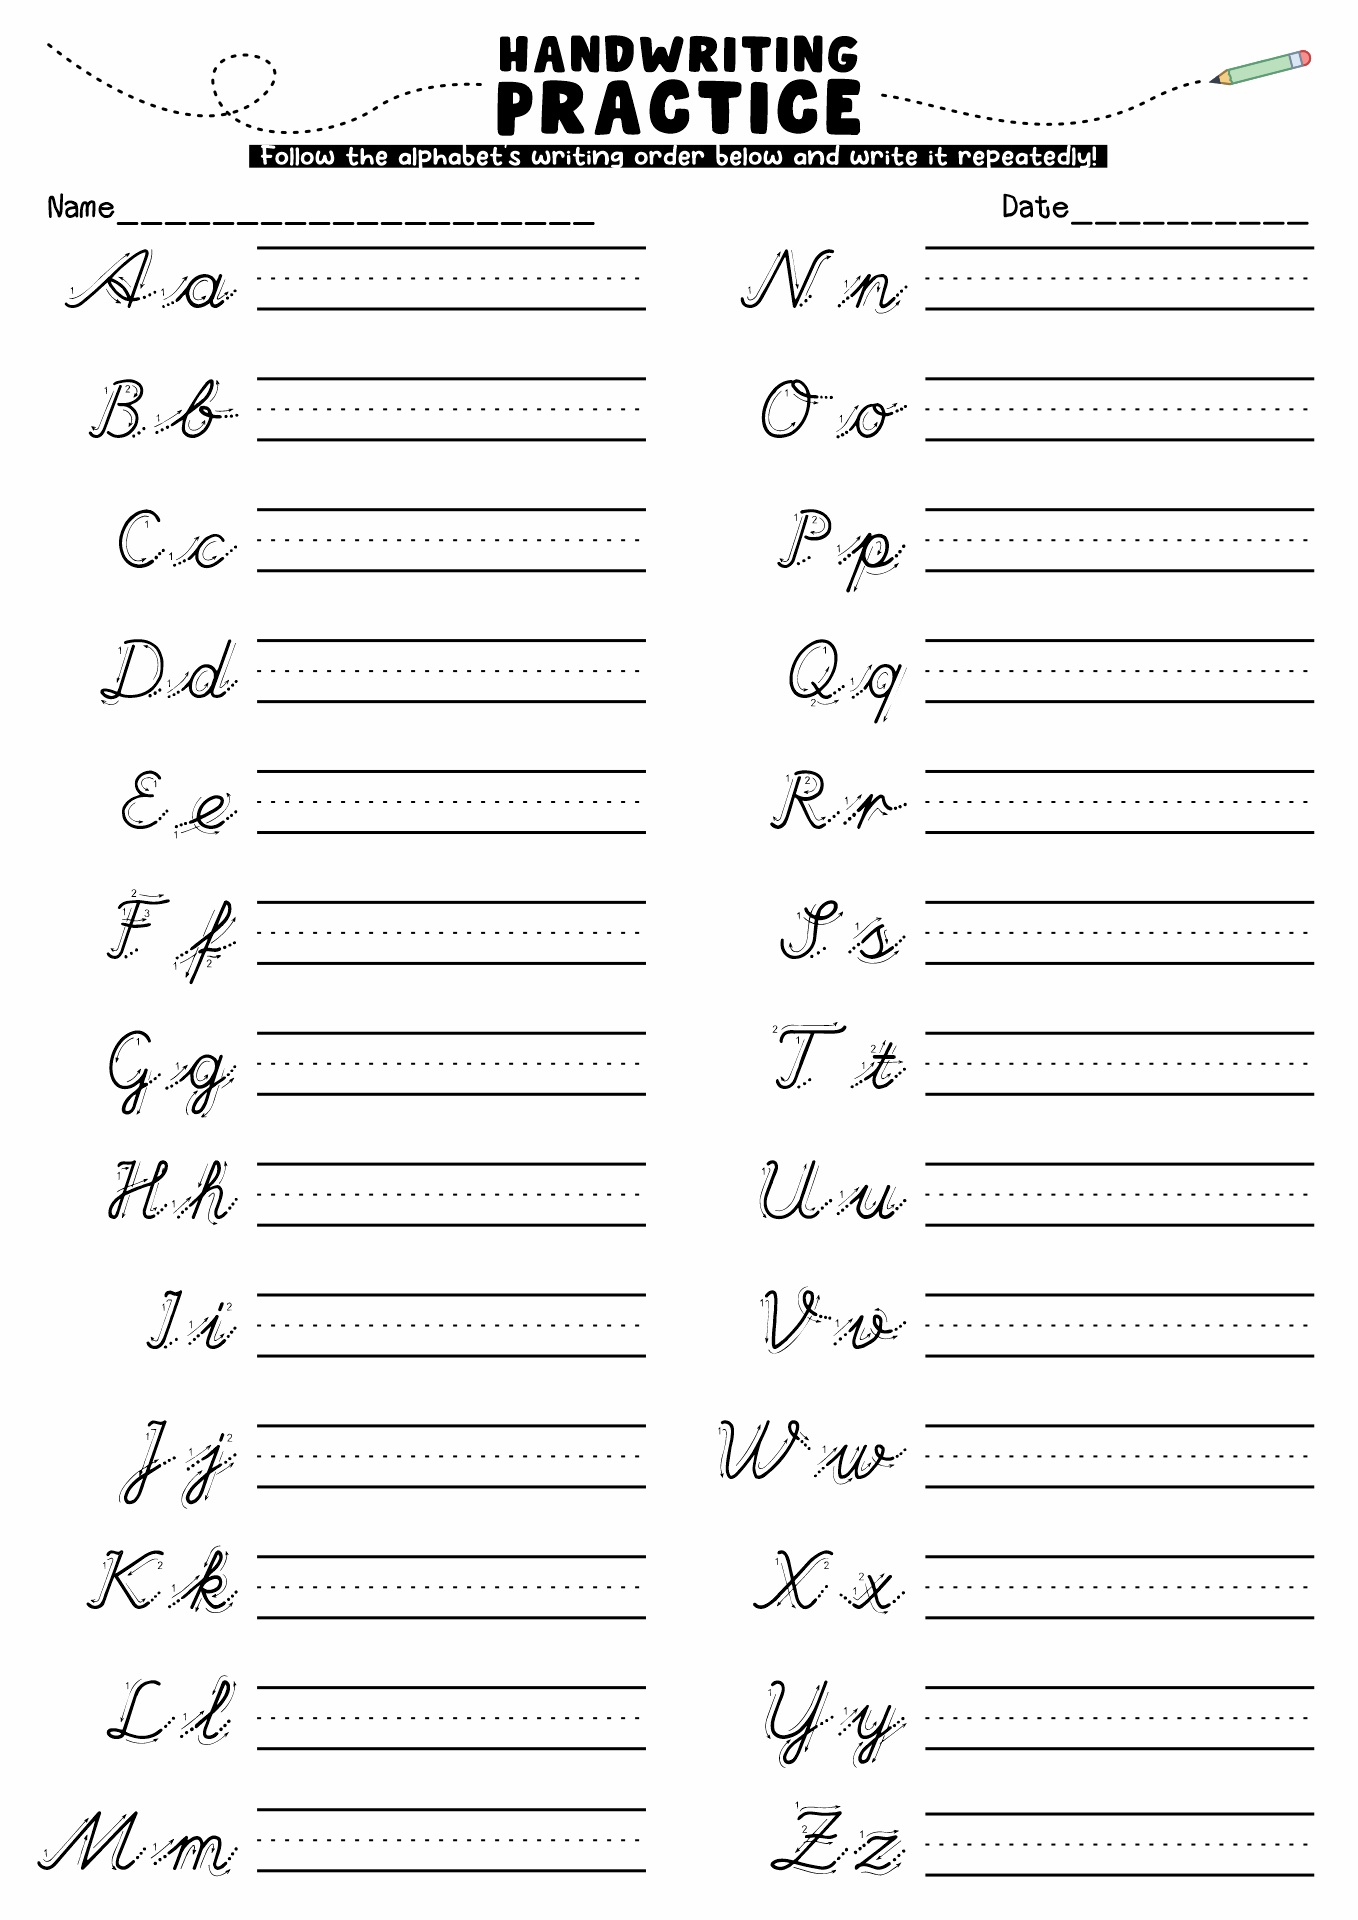 Handwriting Practice Writing Letters Image